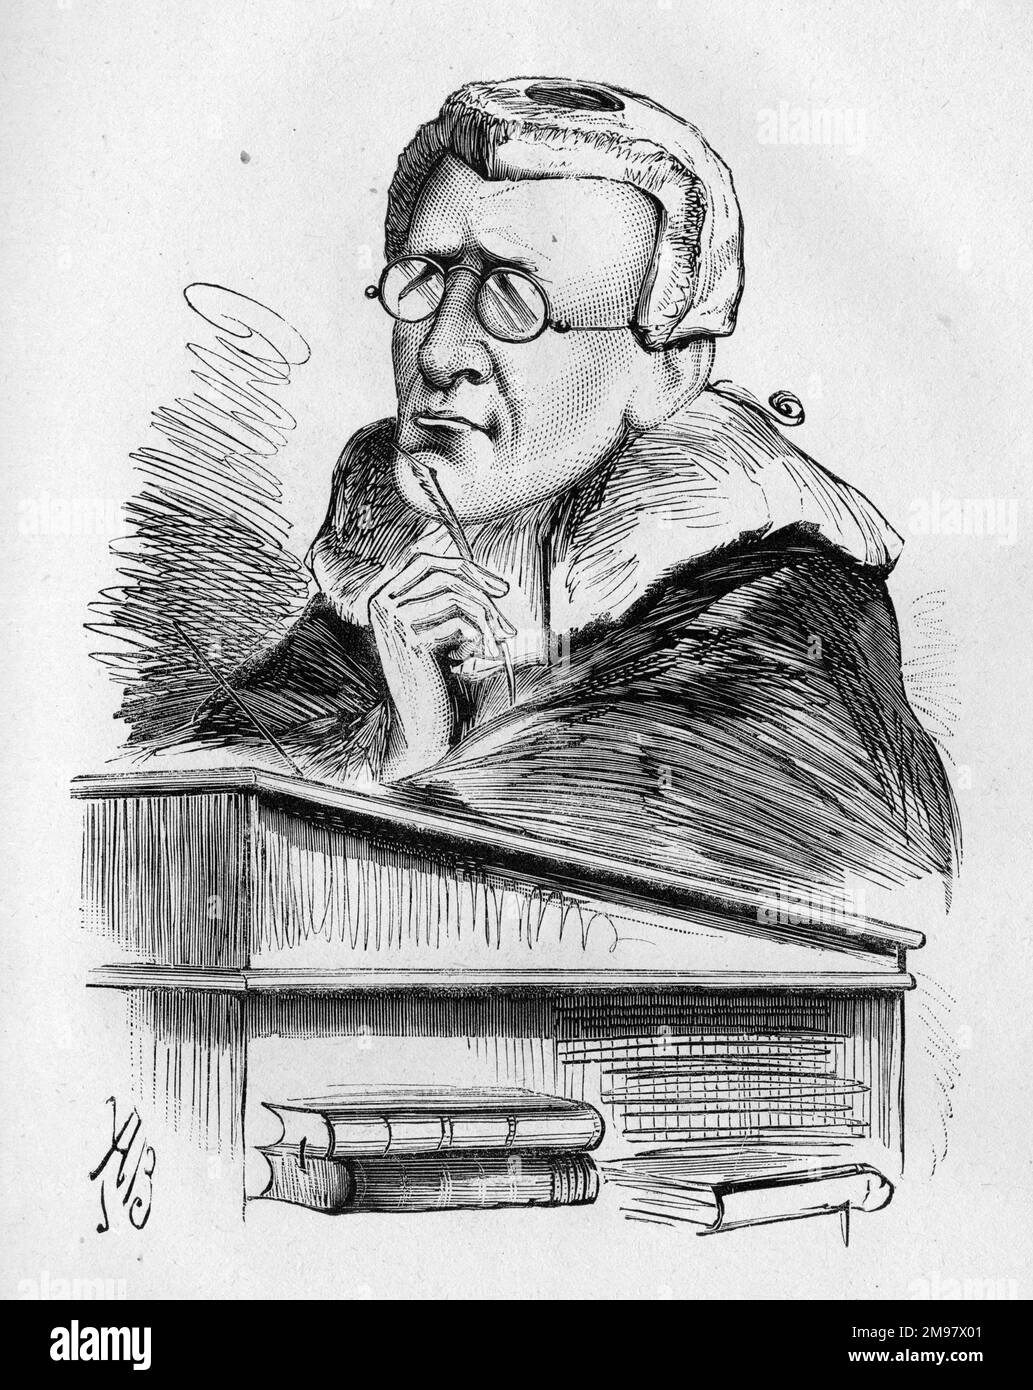 Cartoon, John Duke Coleridge, 1st Baron Coleridge (1820-1894), British lawyer, judge, and Lord Chief Justice of England. 'Gilchrist? Gilchrist? Never heard of her.' A comment on his question in court: 'Who is Connie Gilchrist?' She was, in fact, quite a well known actress, dancer and singer. Stock Photo